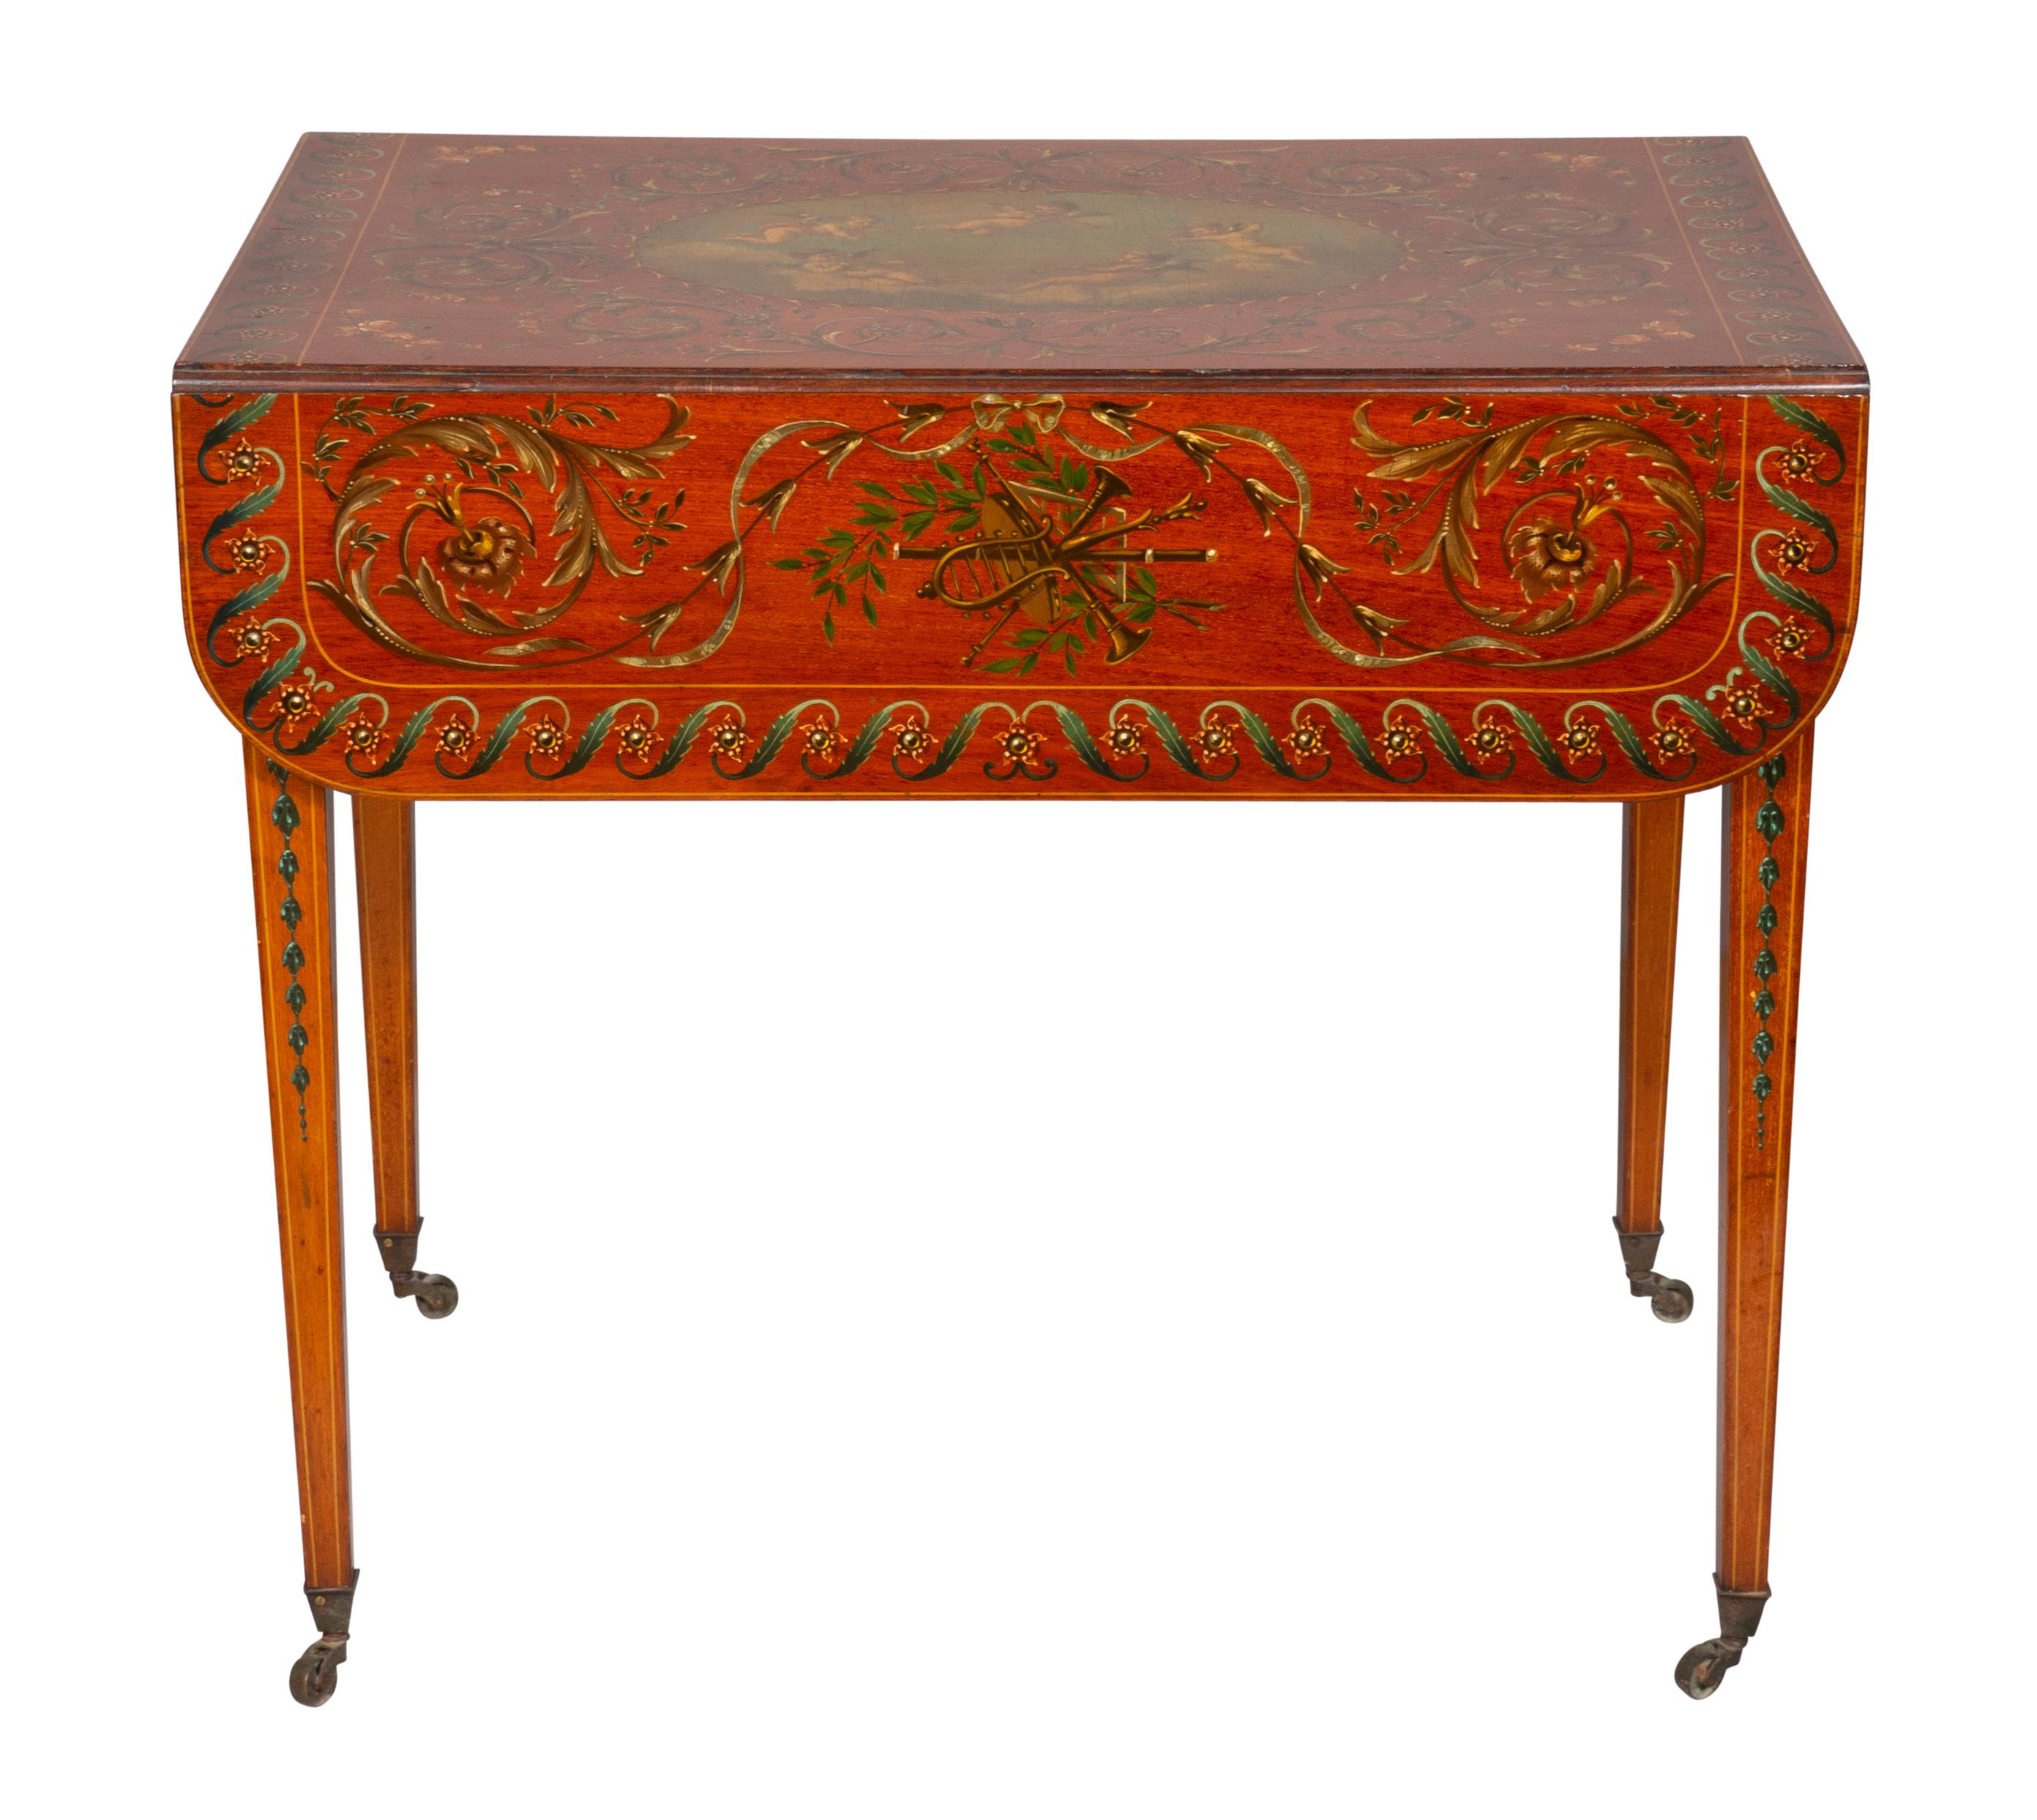 Fine quality table with a rectangular top and rectangular drop leaves, single drawer and square tapered legs and casters. Overall well painted with cherubs and scroll decorated top.